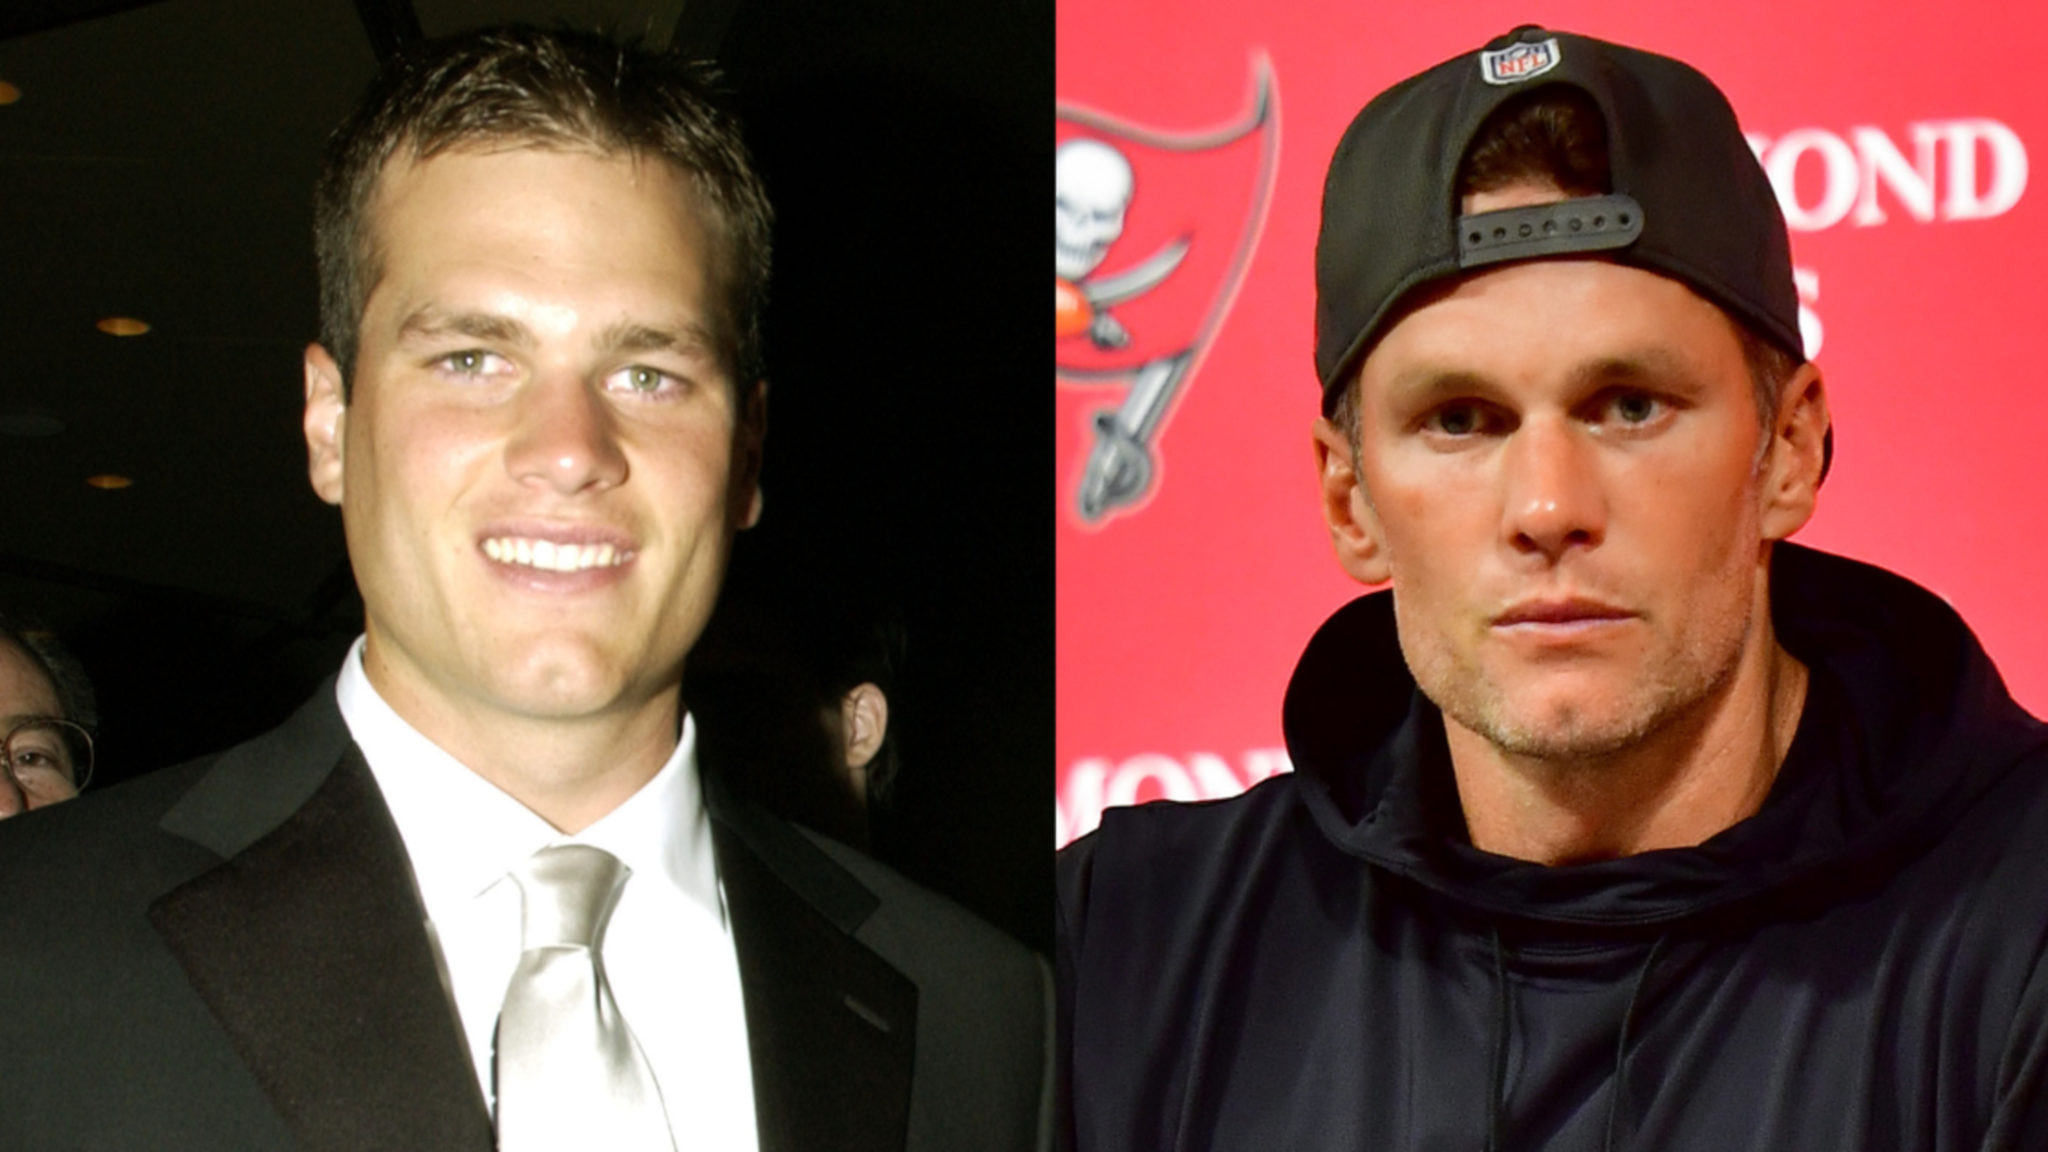 Tom Brady's Drastically Changing Face Reignites Rumors He's Had Plastic Surgery